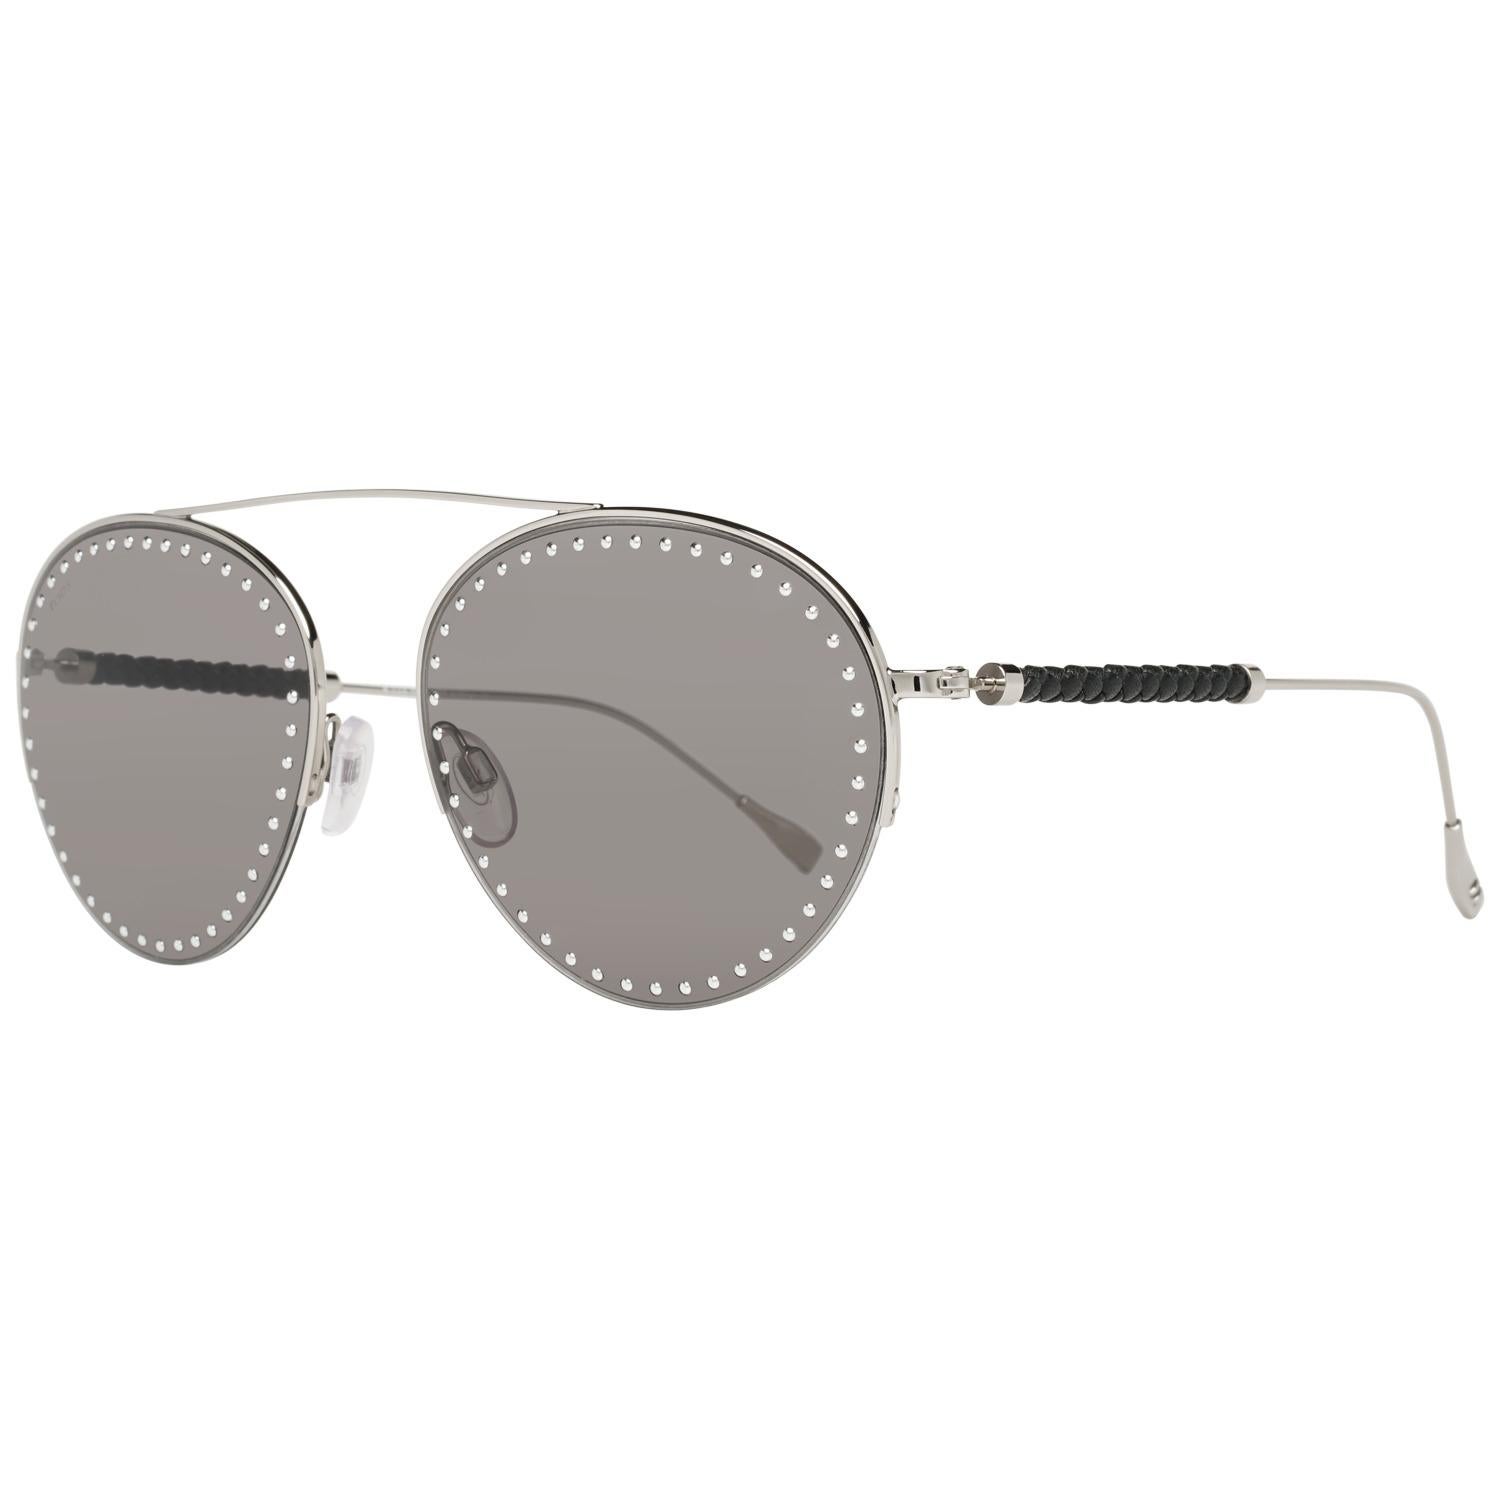 Details

MATERIAL: Metal

COLOR: Silver

MODEL: TO0234 6016A

GENDER: Women

COUNTRY OF MANUFACTURE: Italy

TYPE: Sunglasses

ORIGINAL CASE?: Yes

STYLE: Aviator

OCCASION: Casual

FEATURES: Lightweight

LENS COLOR: Grey

LENS TECHNOLOGY: No